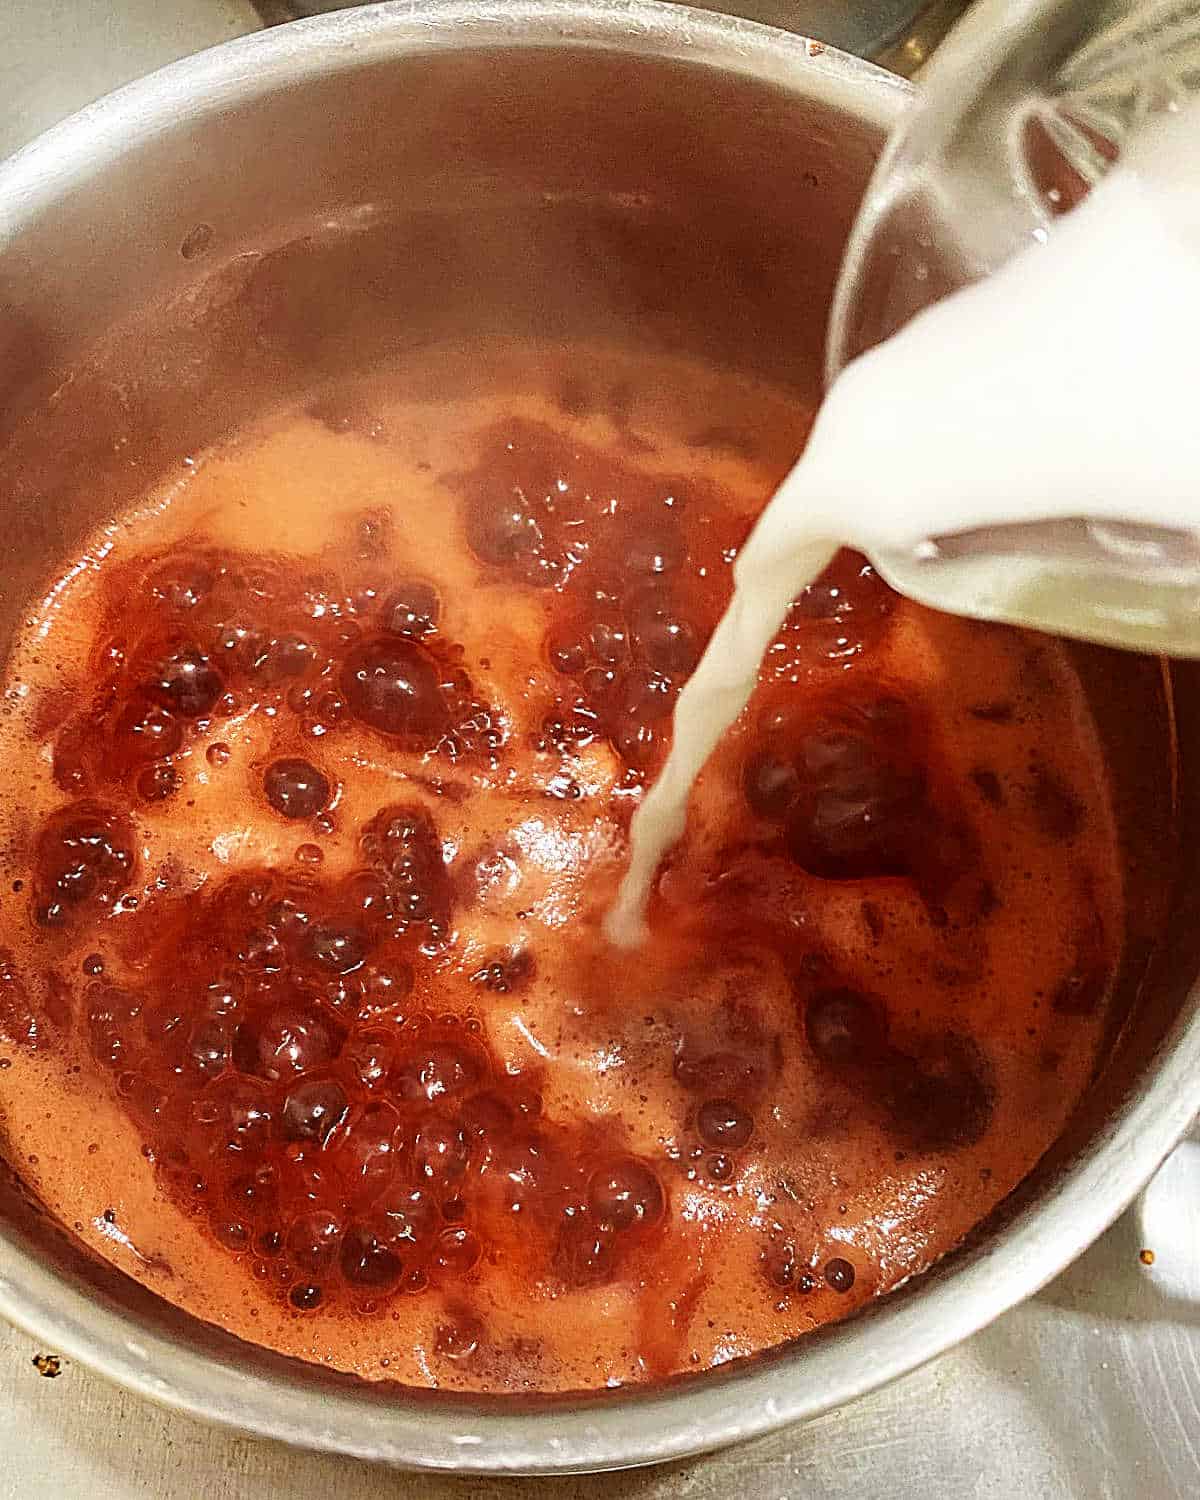 Adding cornstarch slurry to a metal saucepan with boiling stawberry sauce.